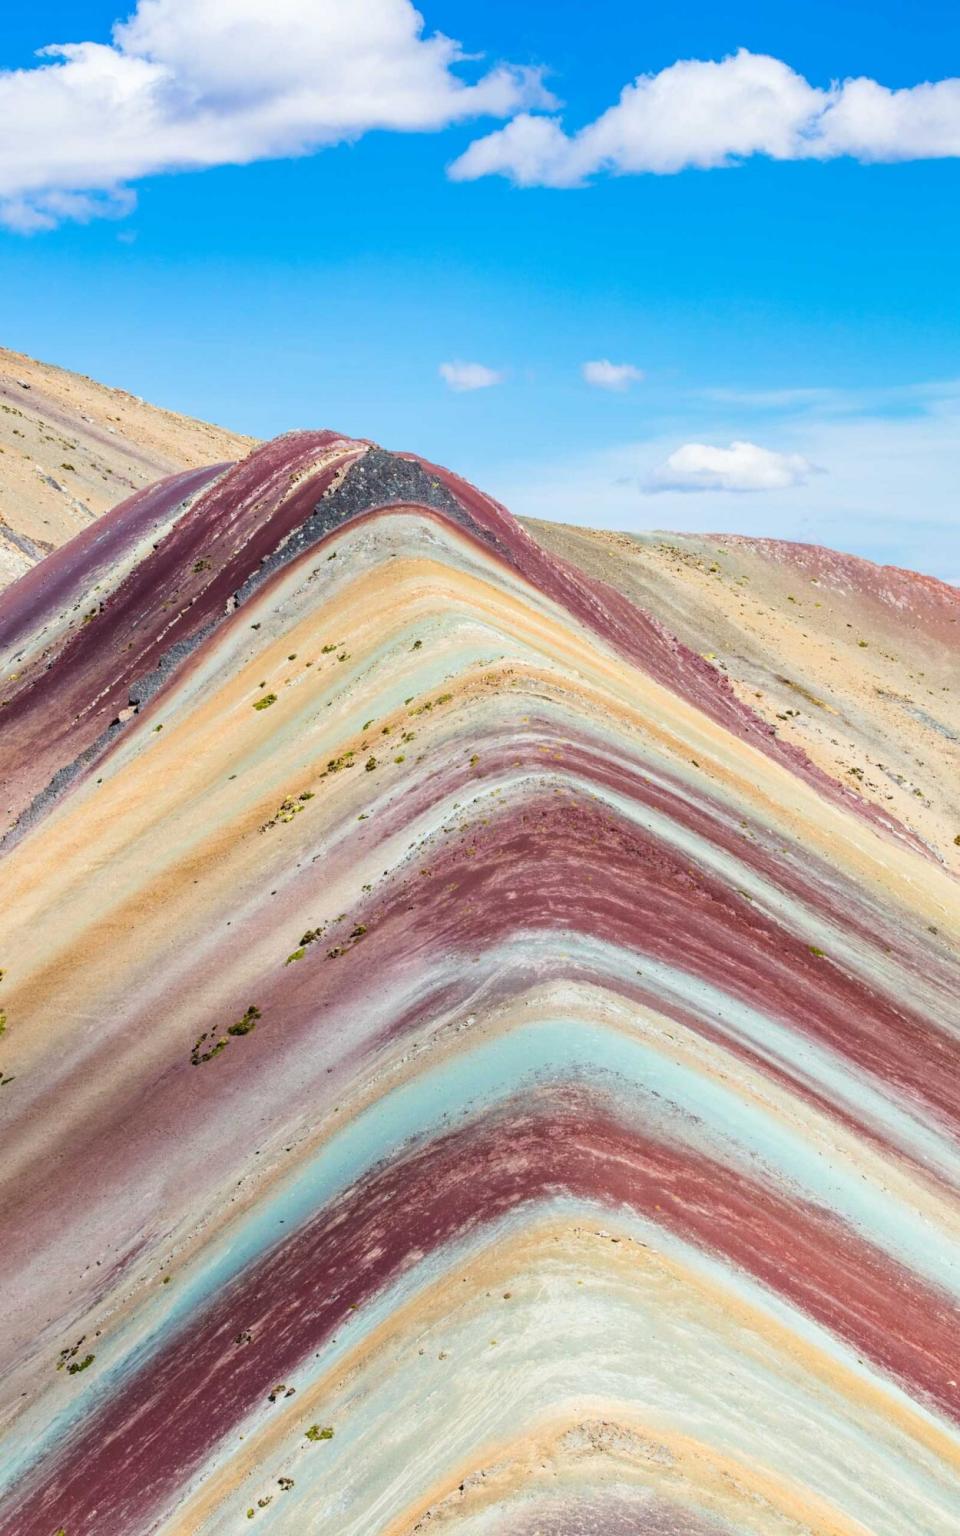 A mountain of miracles stained in seven colors Mt.vinicunca